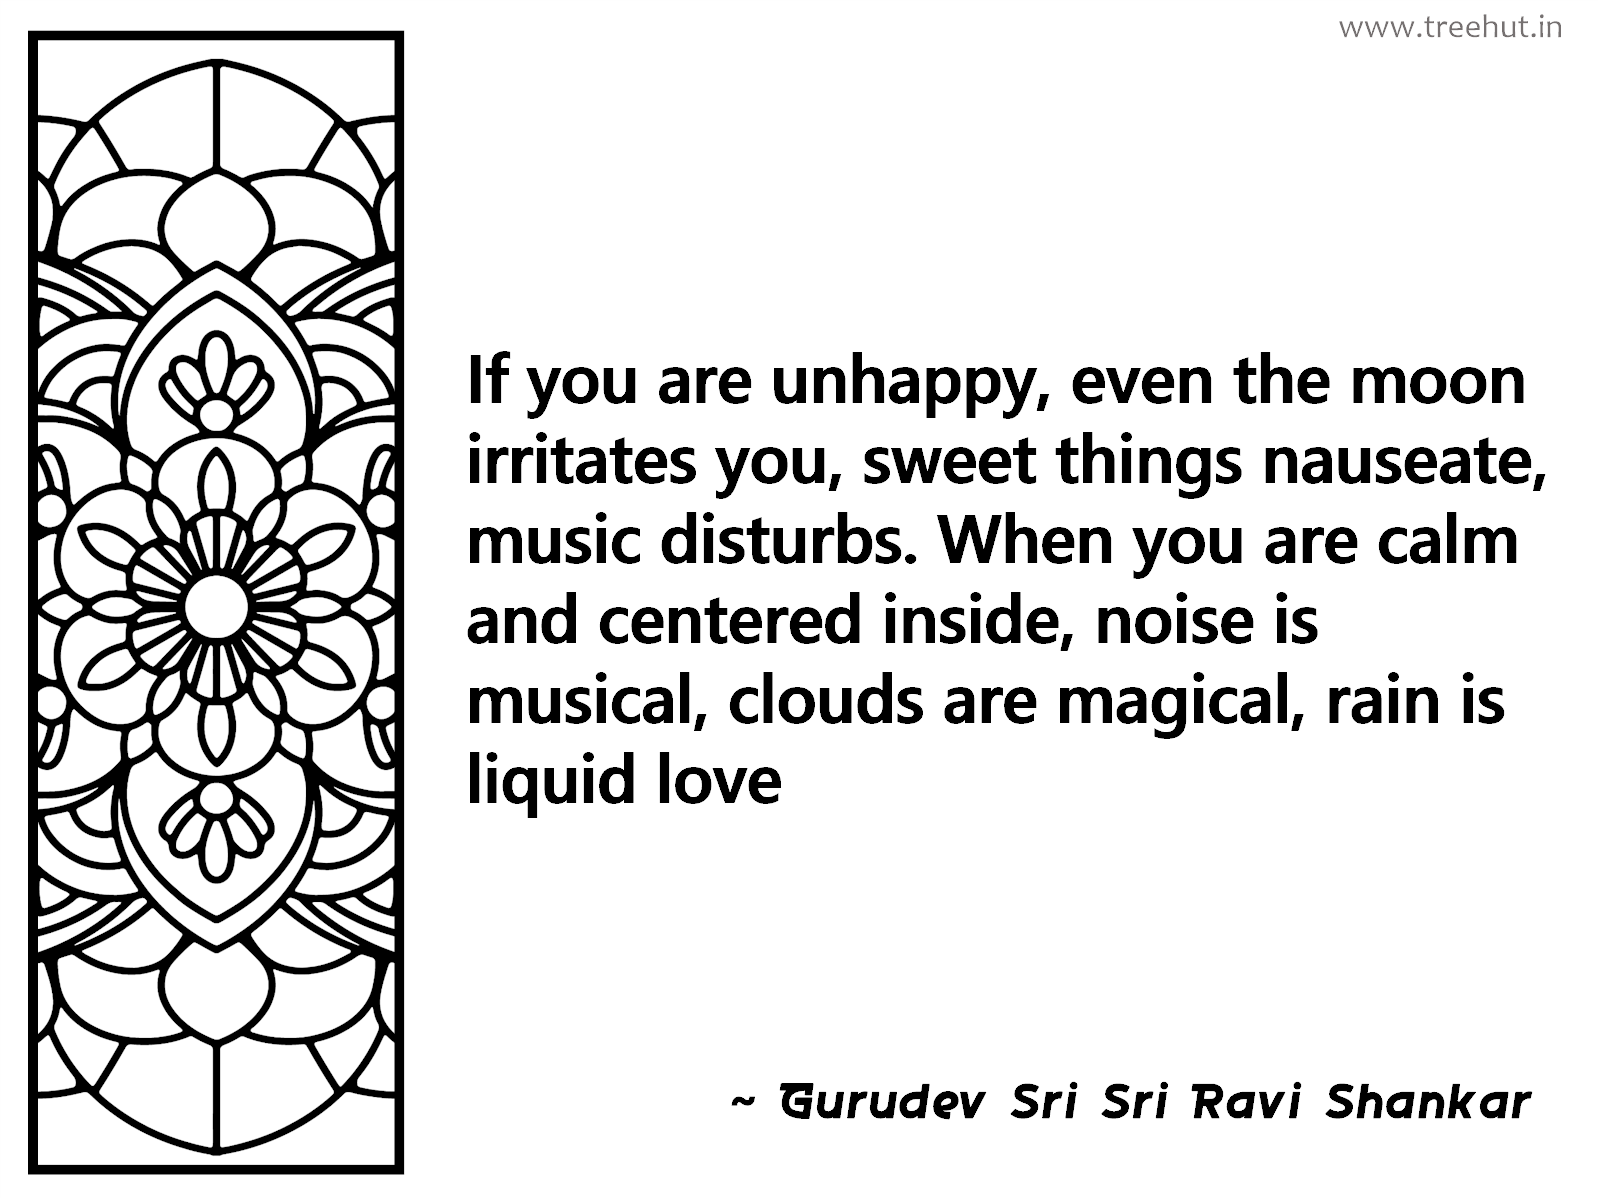 If you are unhappy, even the moon irritates you, sweet things nauseate, music disturbs. When you are calm and centered inside, noise is musical, clouds are magical, rain is liquid love Inspirational Quote by Gurudev Sri Sri Ravi Shankar, coloring pages